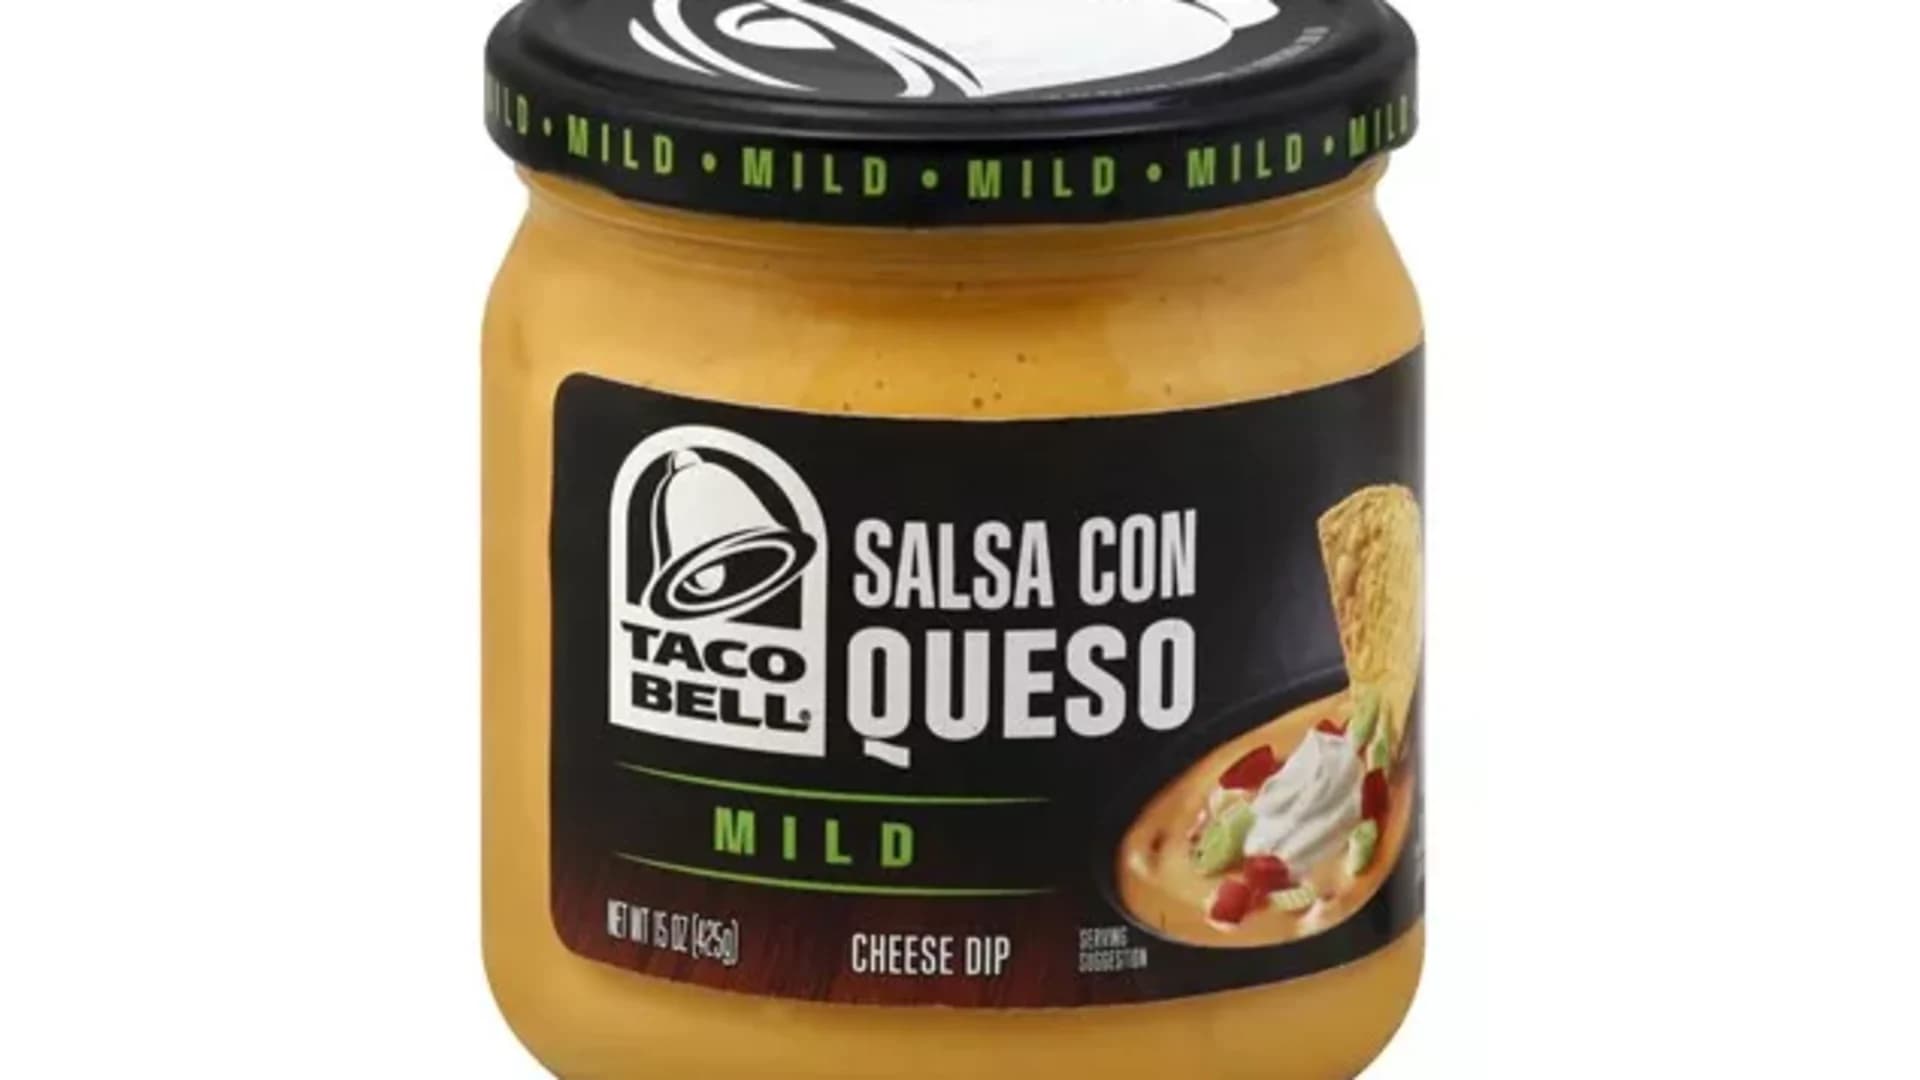 Taco Bell Salsa Con Queso recalled due to botulism risk